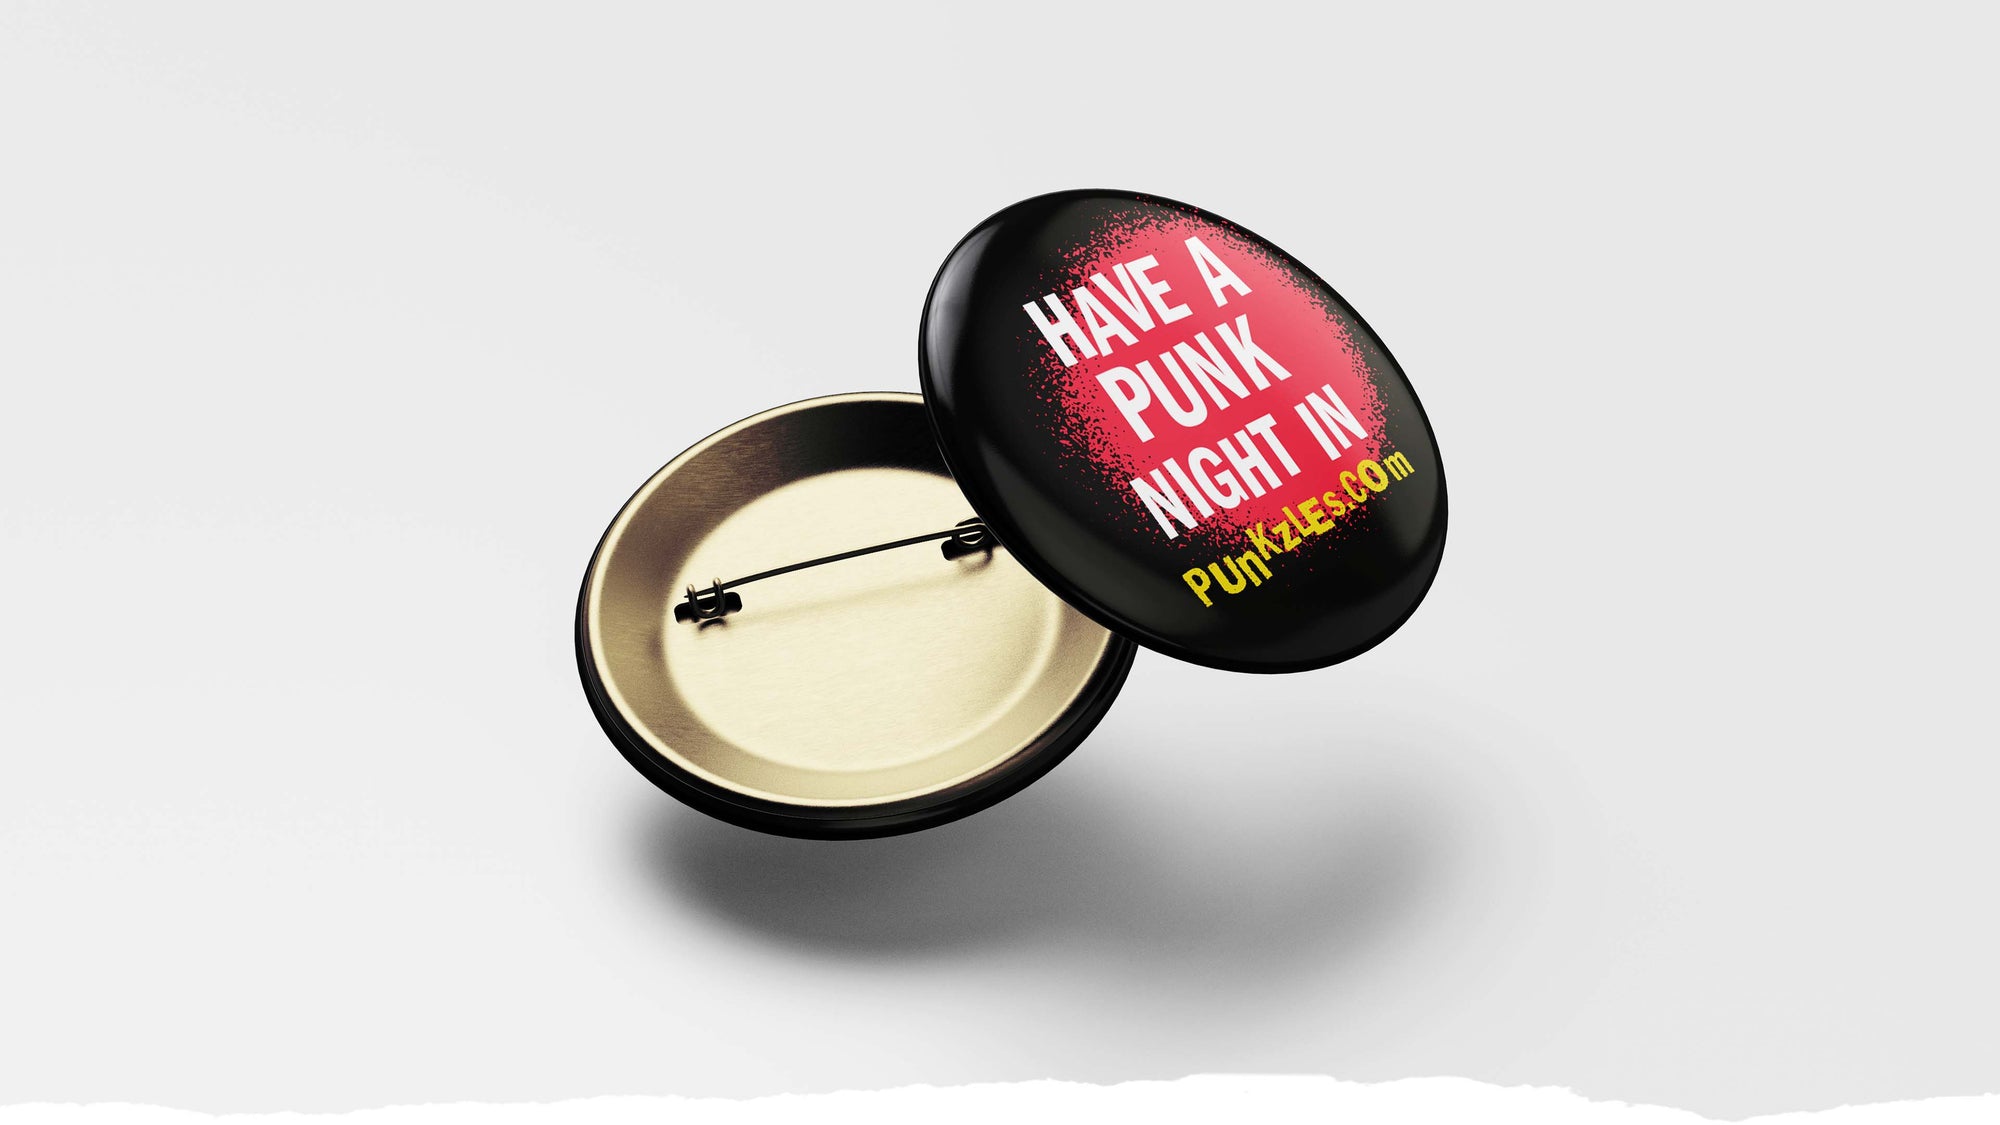 photograph of pin that says 'Have a punk night in. punkzles.com'